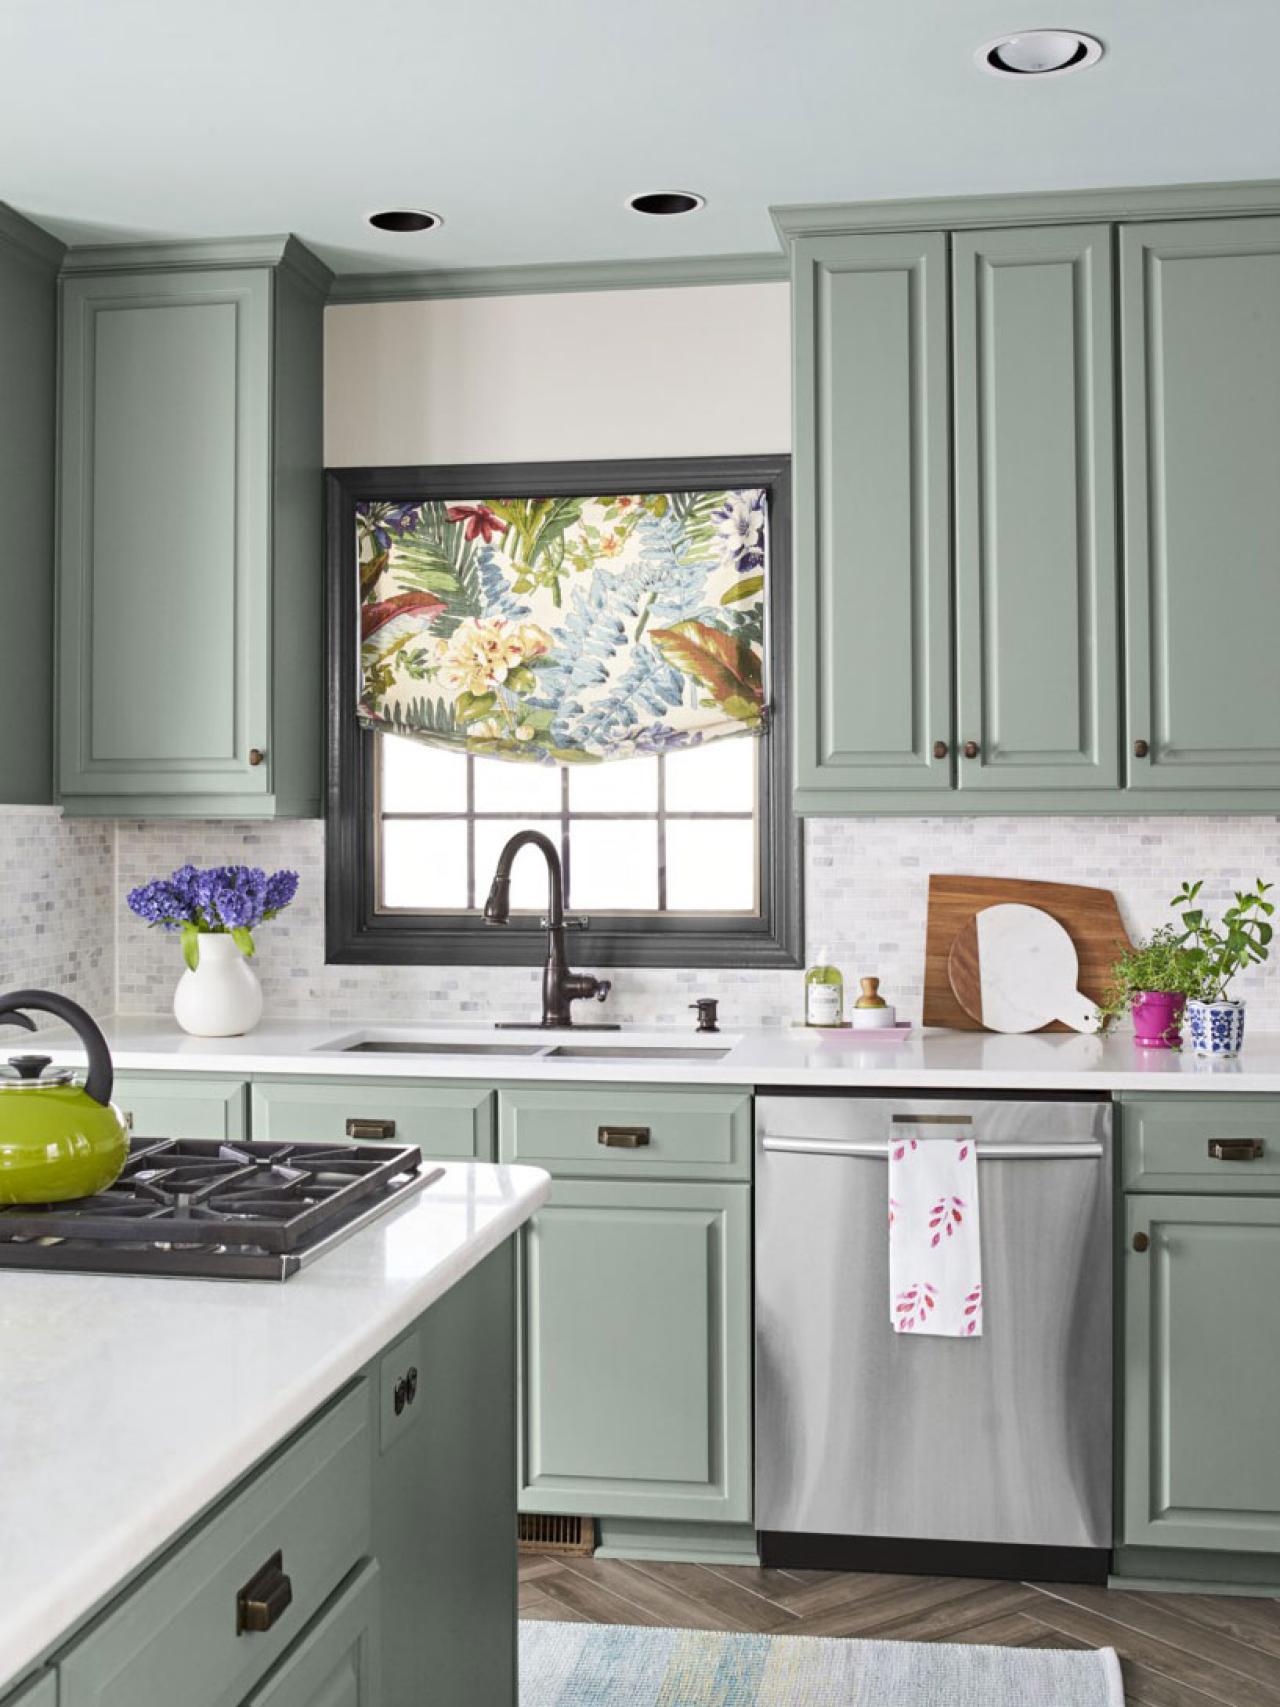 Kitchen Decorating Inspiration From a Colorful Virginia Home | HGTV